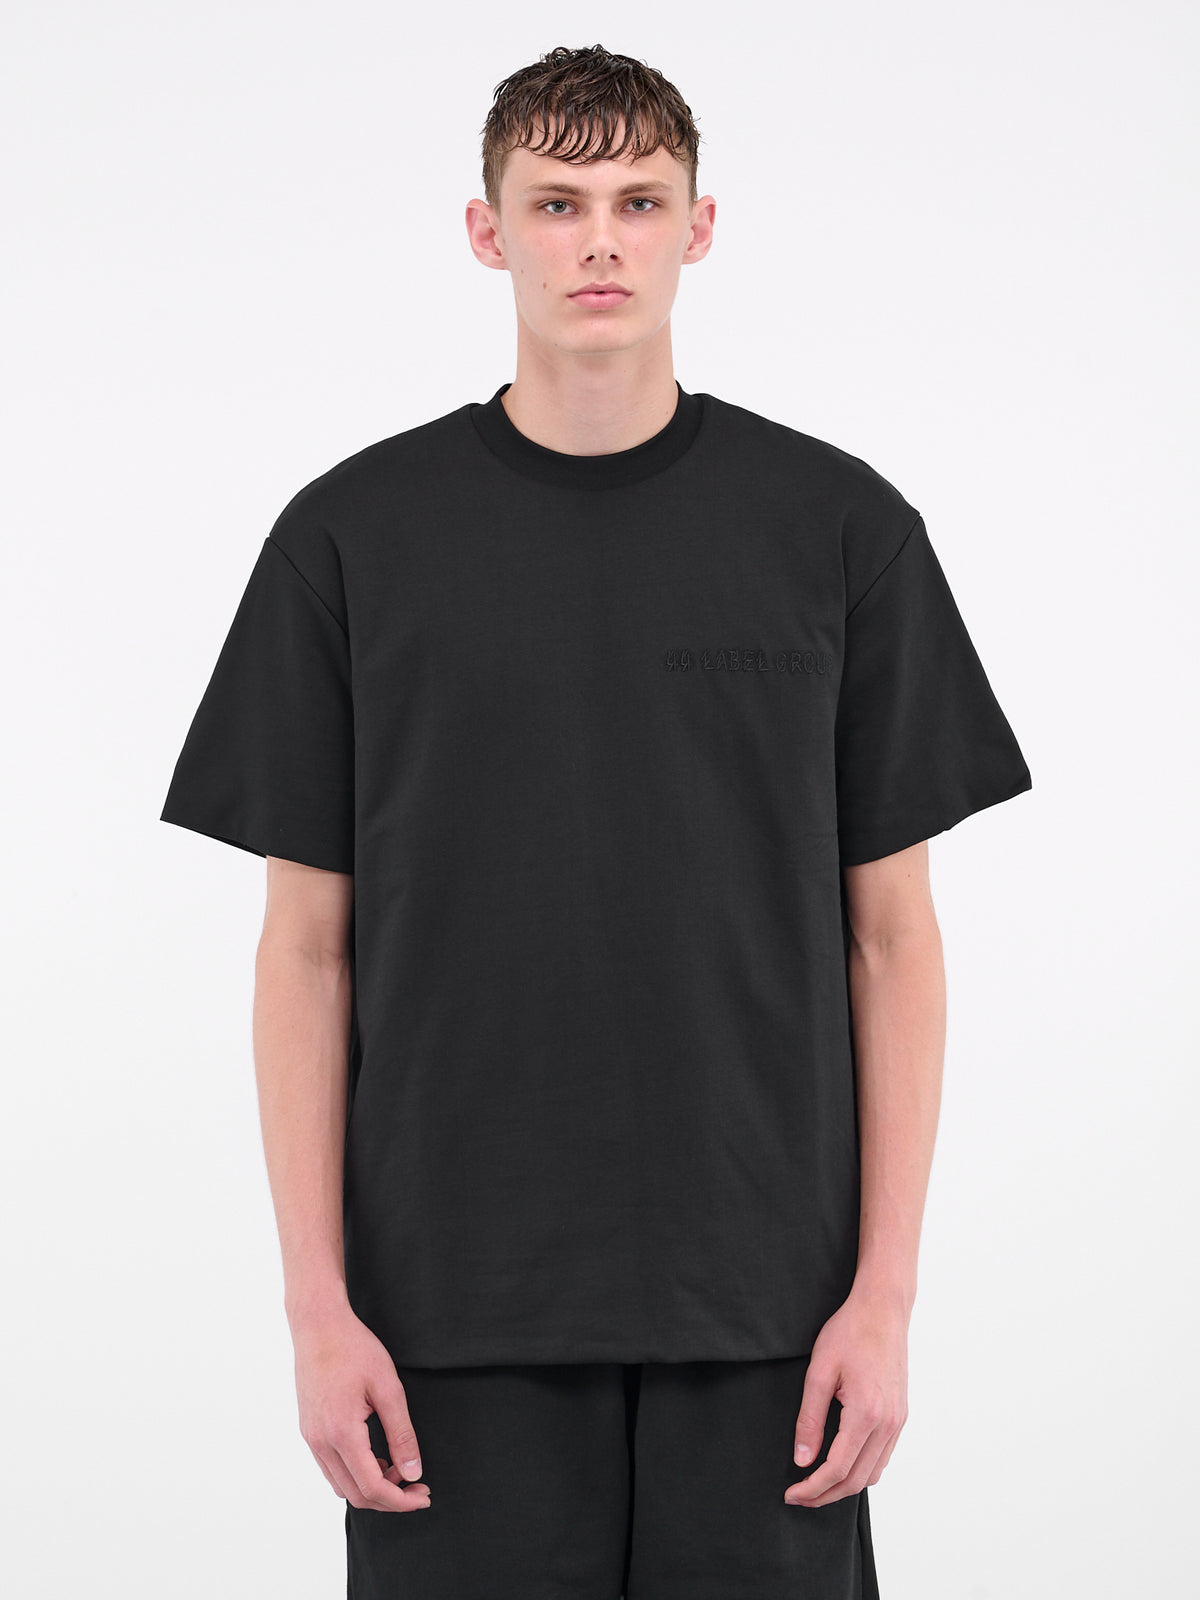 44 LABEL GROUP T-Shirt | H. Lorenzo - front